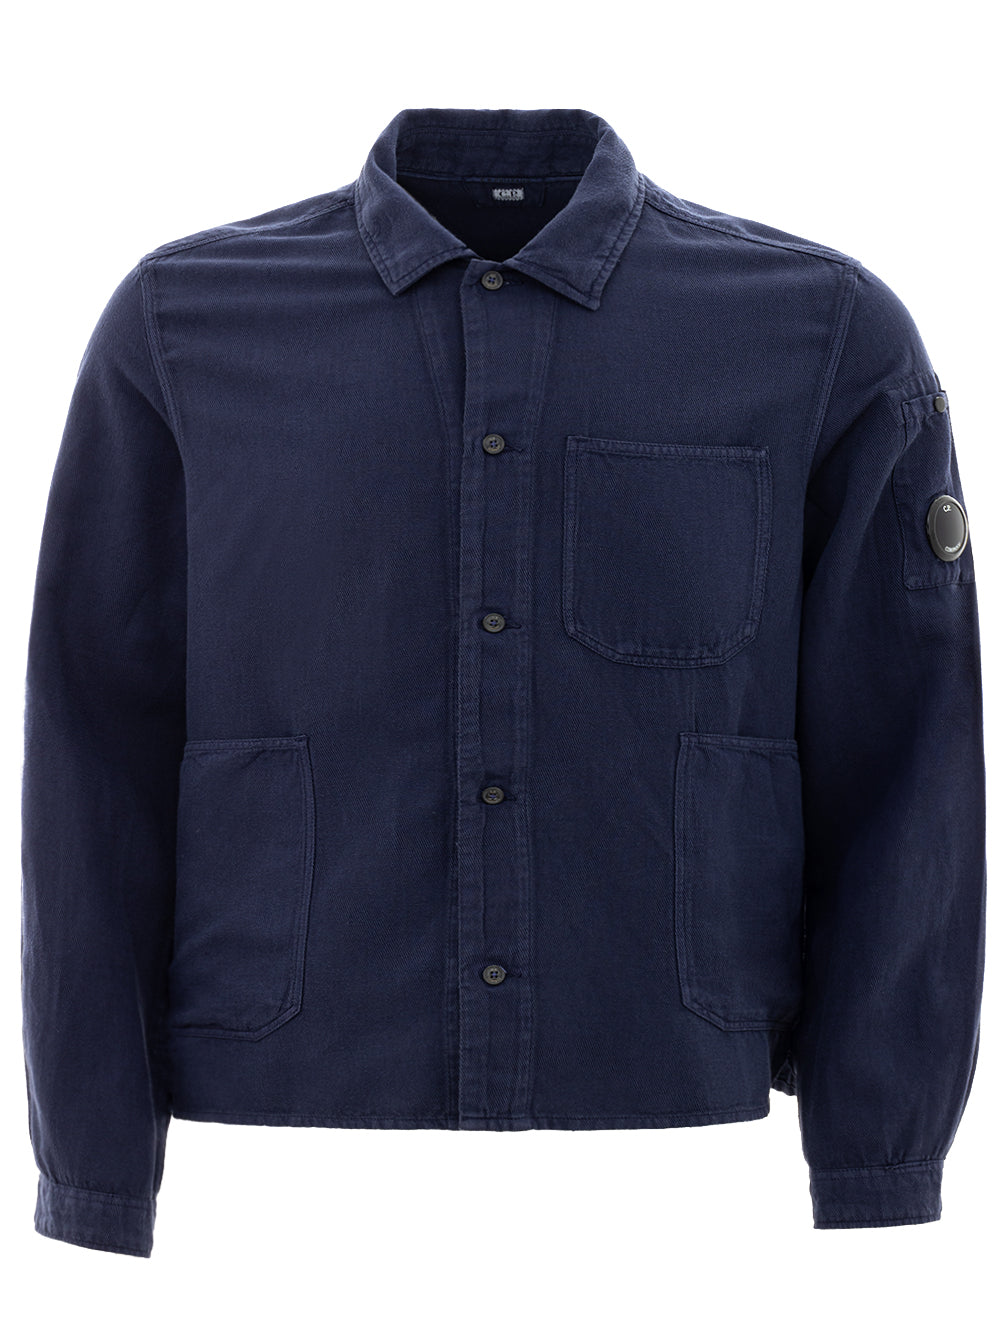 CP Company Linen Blend Shirt with Pockets